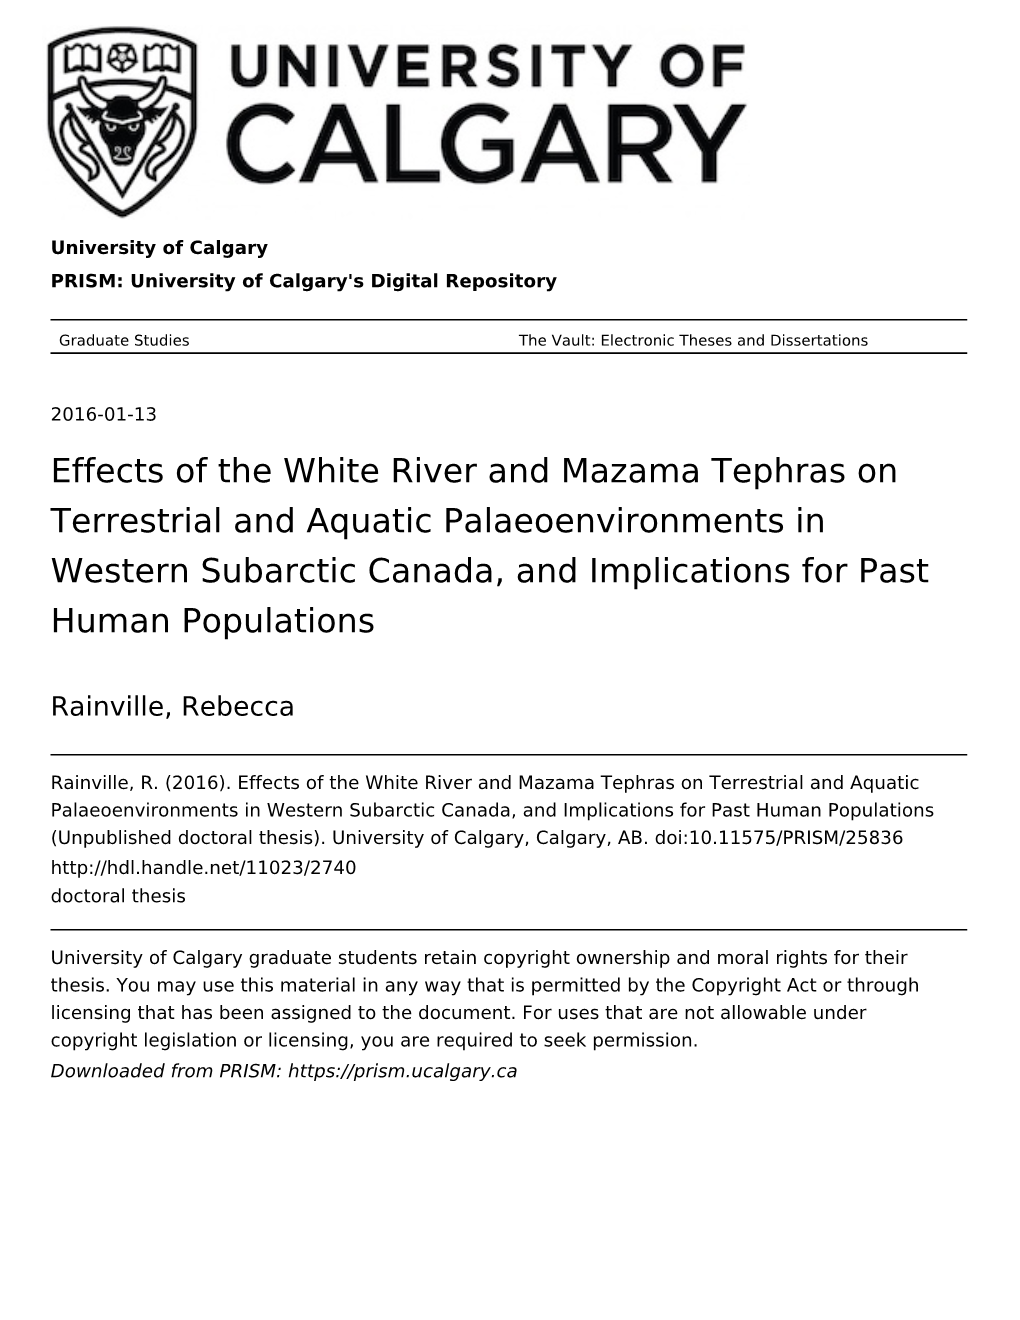 Effects of the White River and Mazama Tephras on Terrestrial and Aquatic Palaeoenvironments in Western Subarctic Canada, and Implications for Past Human Populations